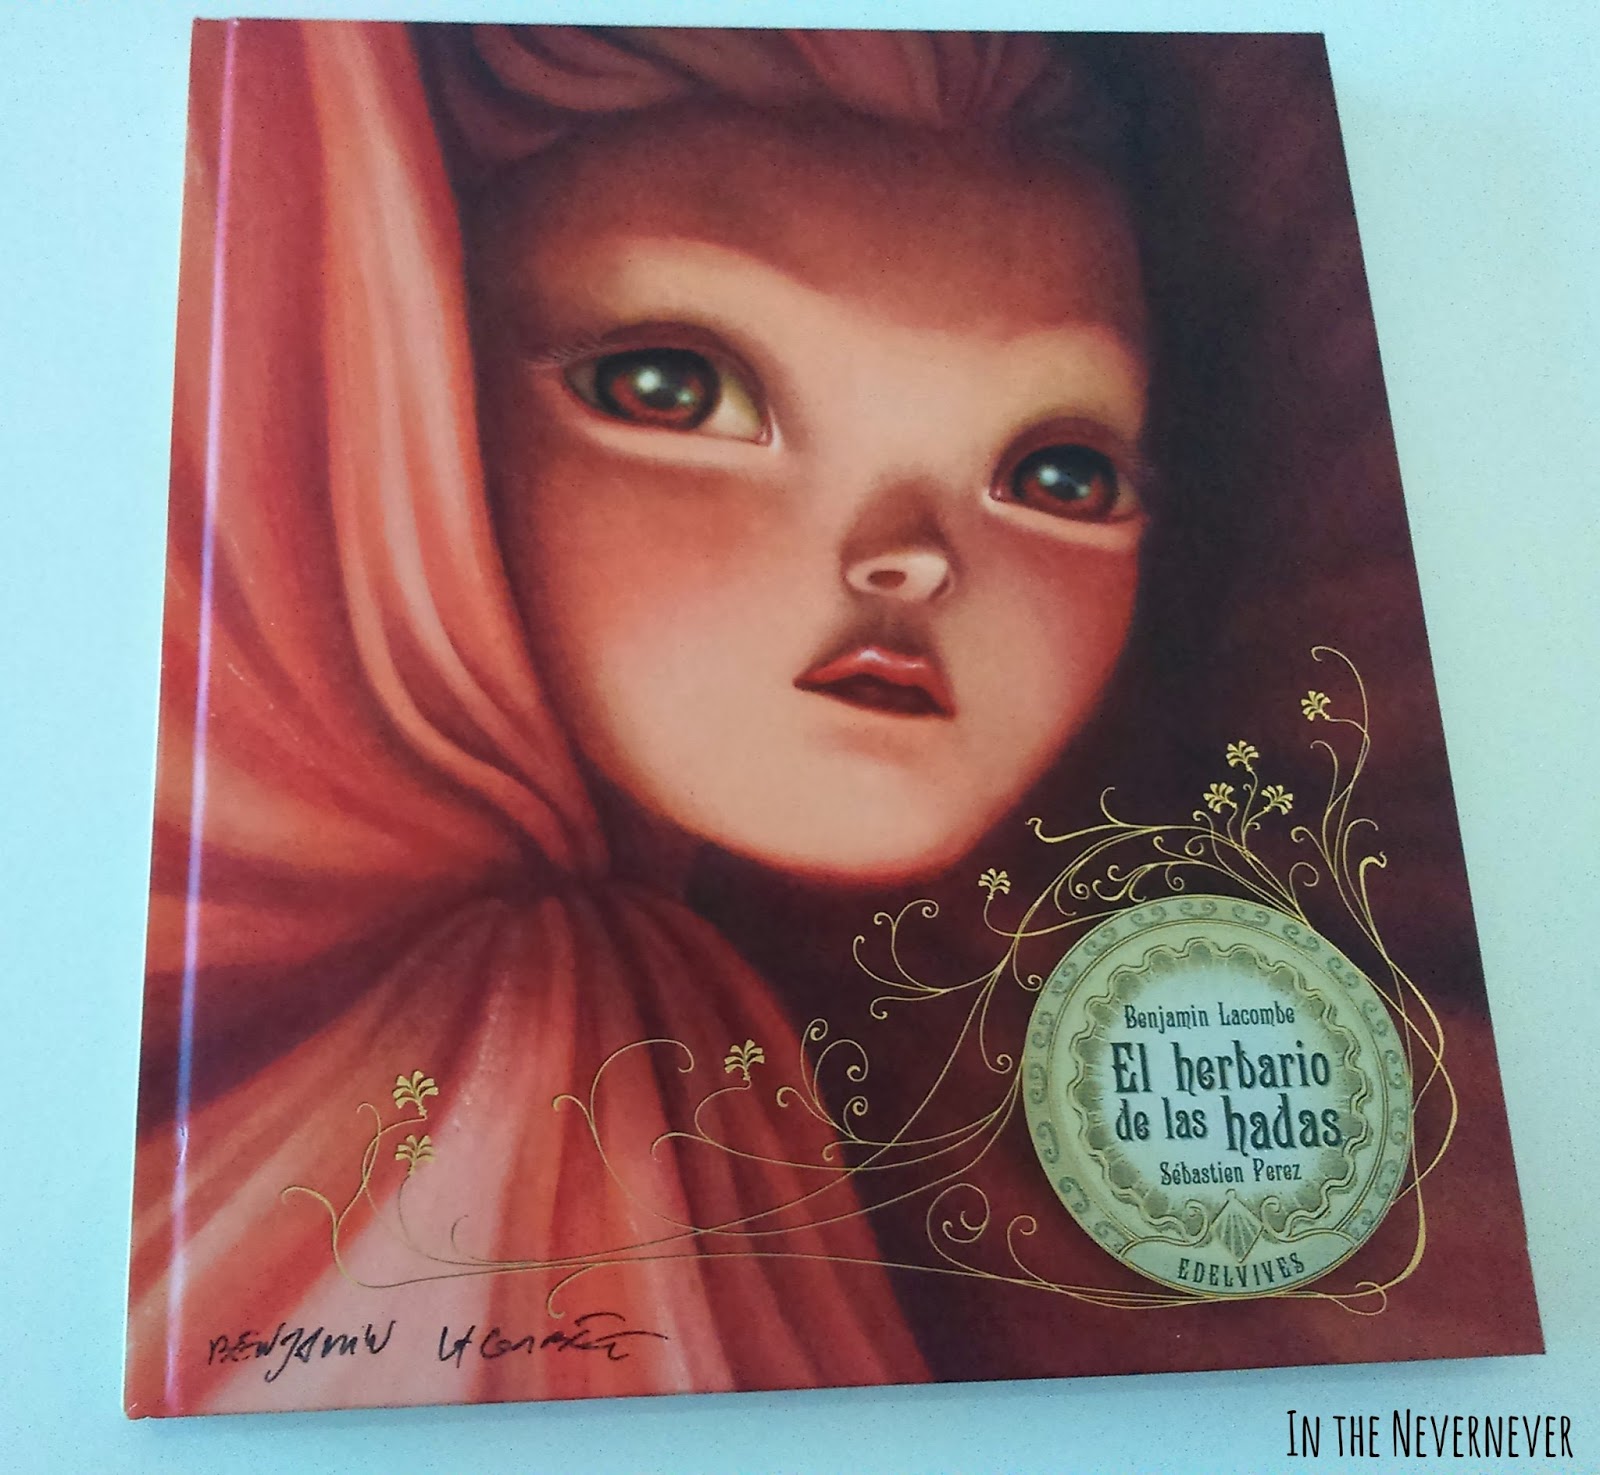 Benjamin Lacombe (official Page) - 2018 is coming, do you already have your  Calendar and planner ?? #benjaminlacombe #2018 #calendar #planner